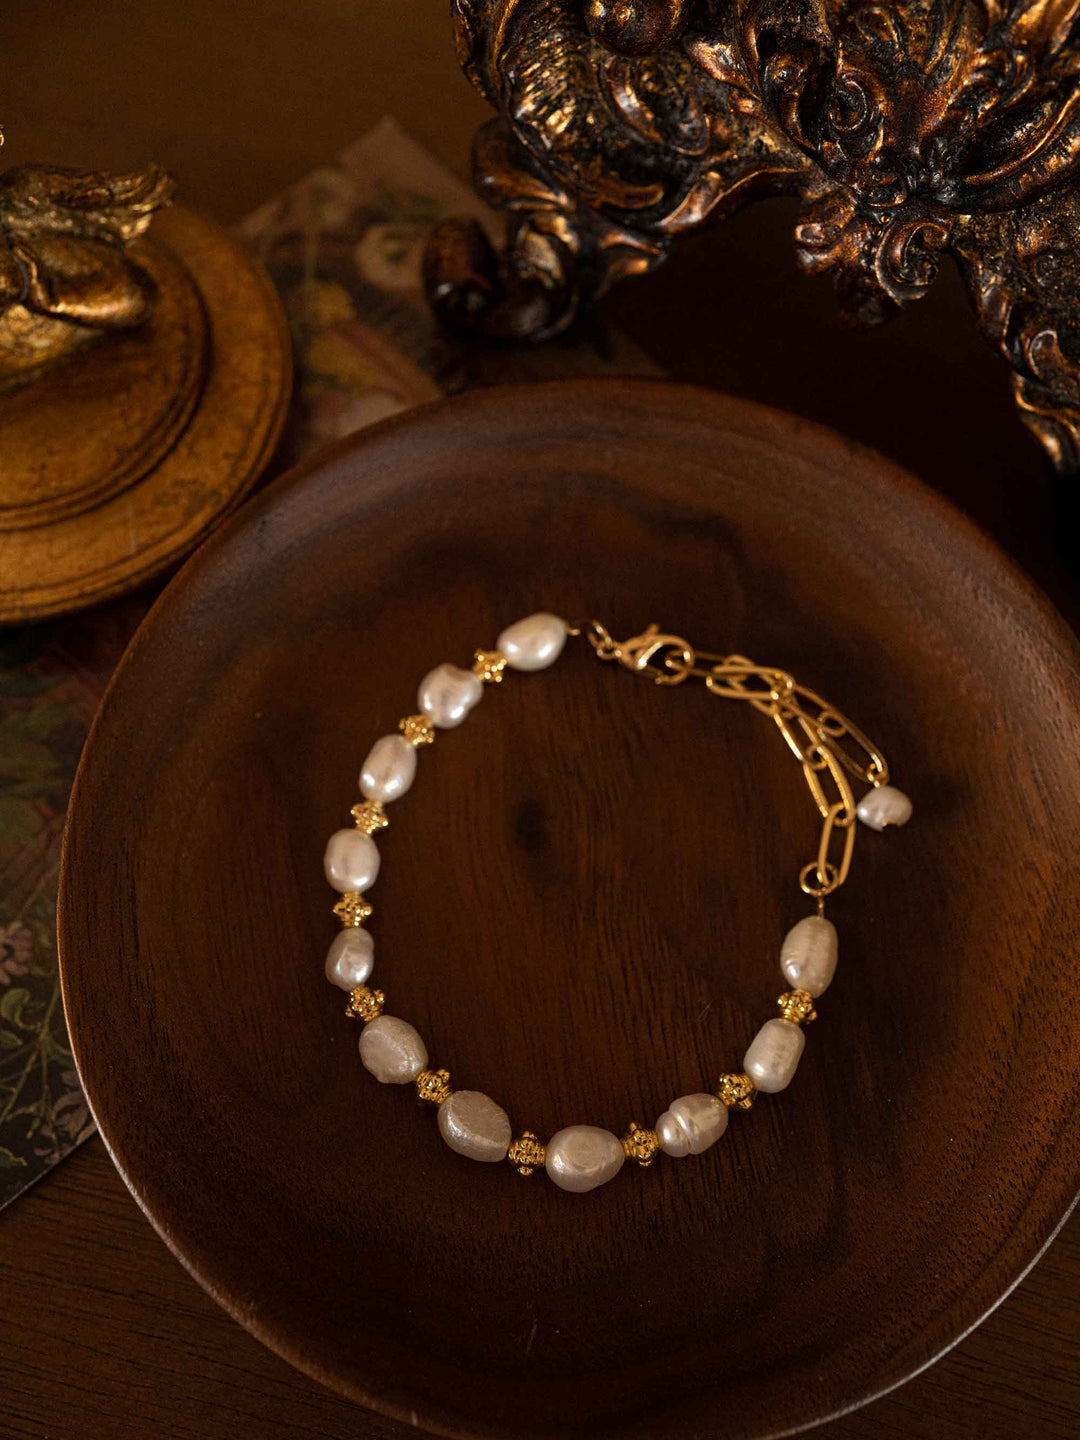 A beaded bracelet of cultured pearls